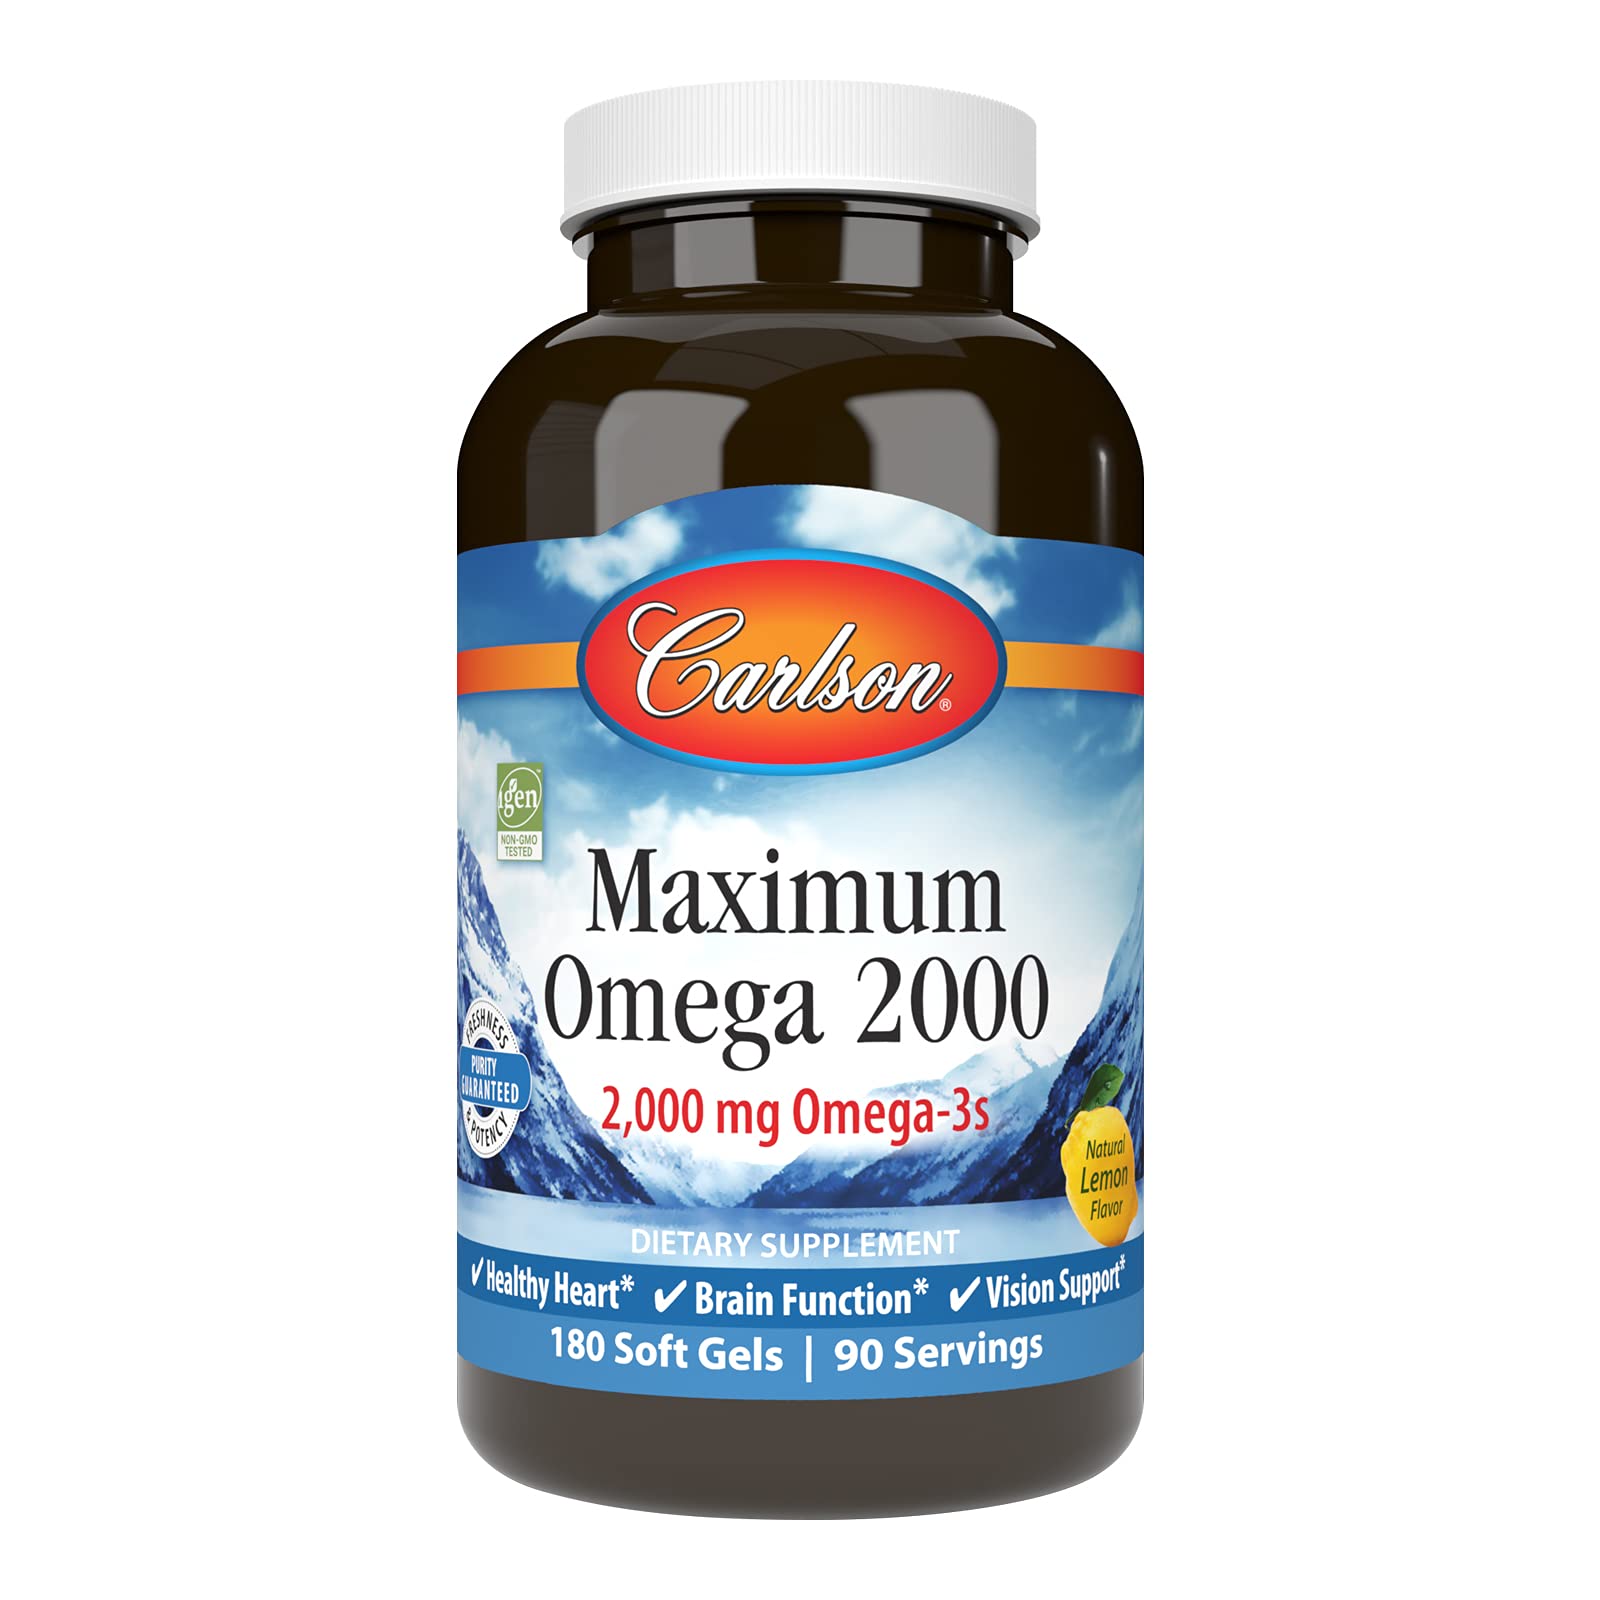 Carlson - Maximum Omega 2000, 2000 mg Omega-3 Fatty Acids Including EPA and DHA, Wild-Caught, Norwegian Fish Oil Supplement, Sustainably Sourced Fi...